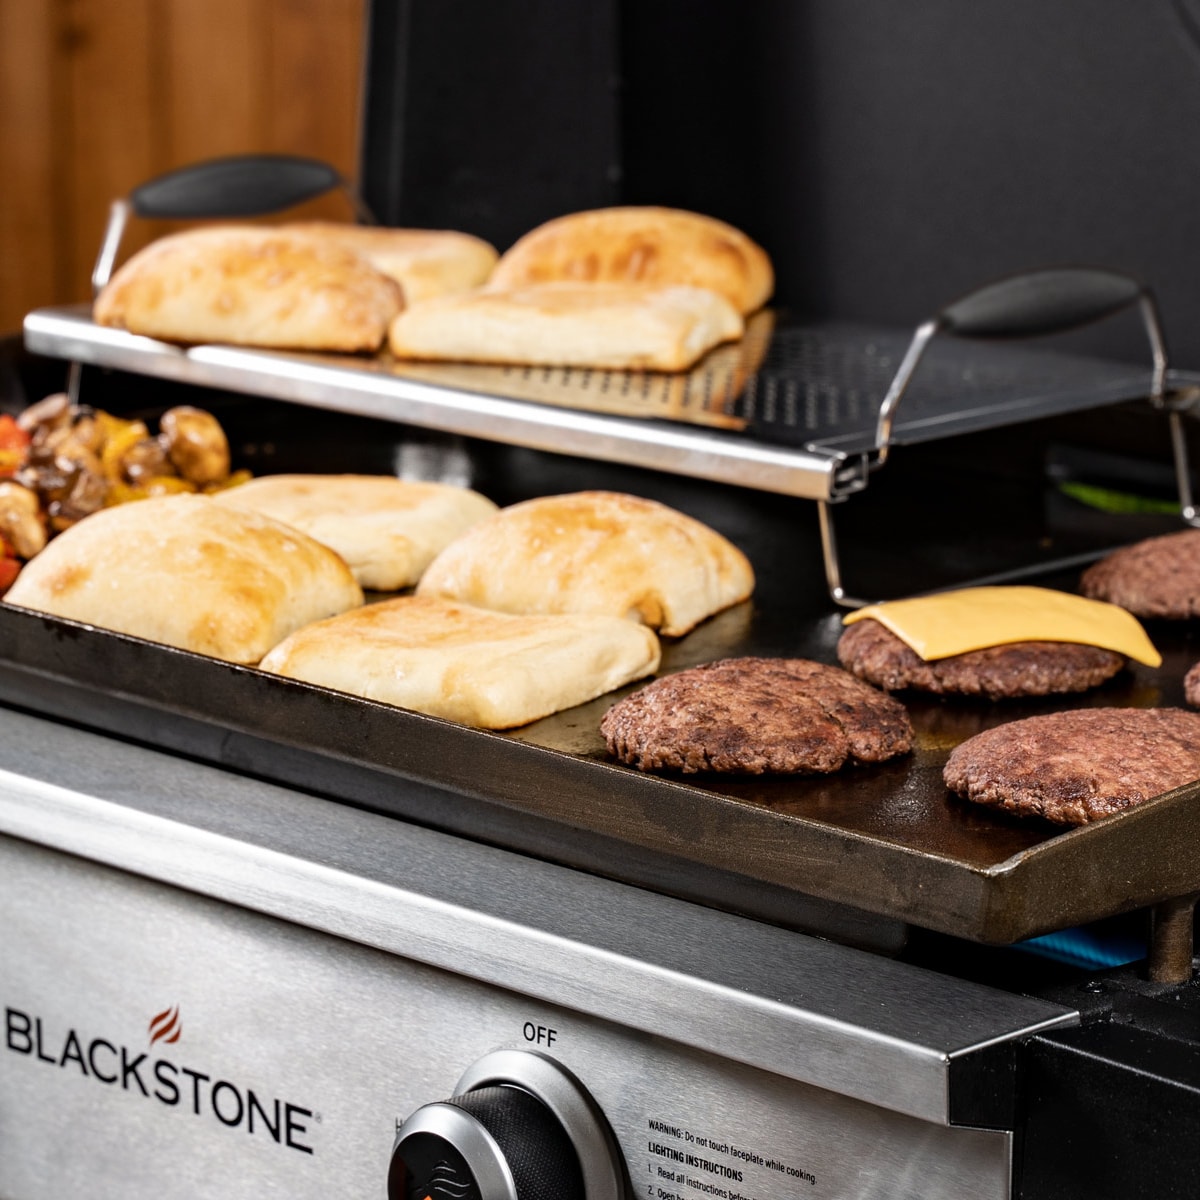 STILL more new Blackstone Griddle accessories - Knives, Warming Rack,  Temperature Probes AND MORE! 